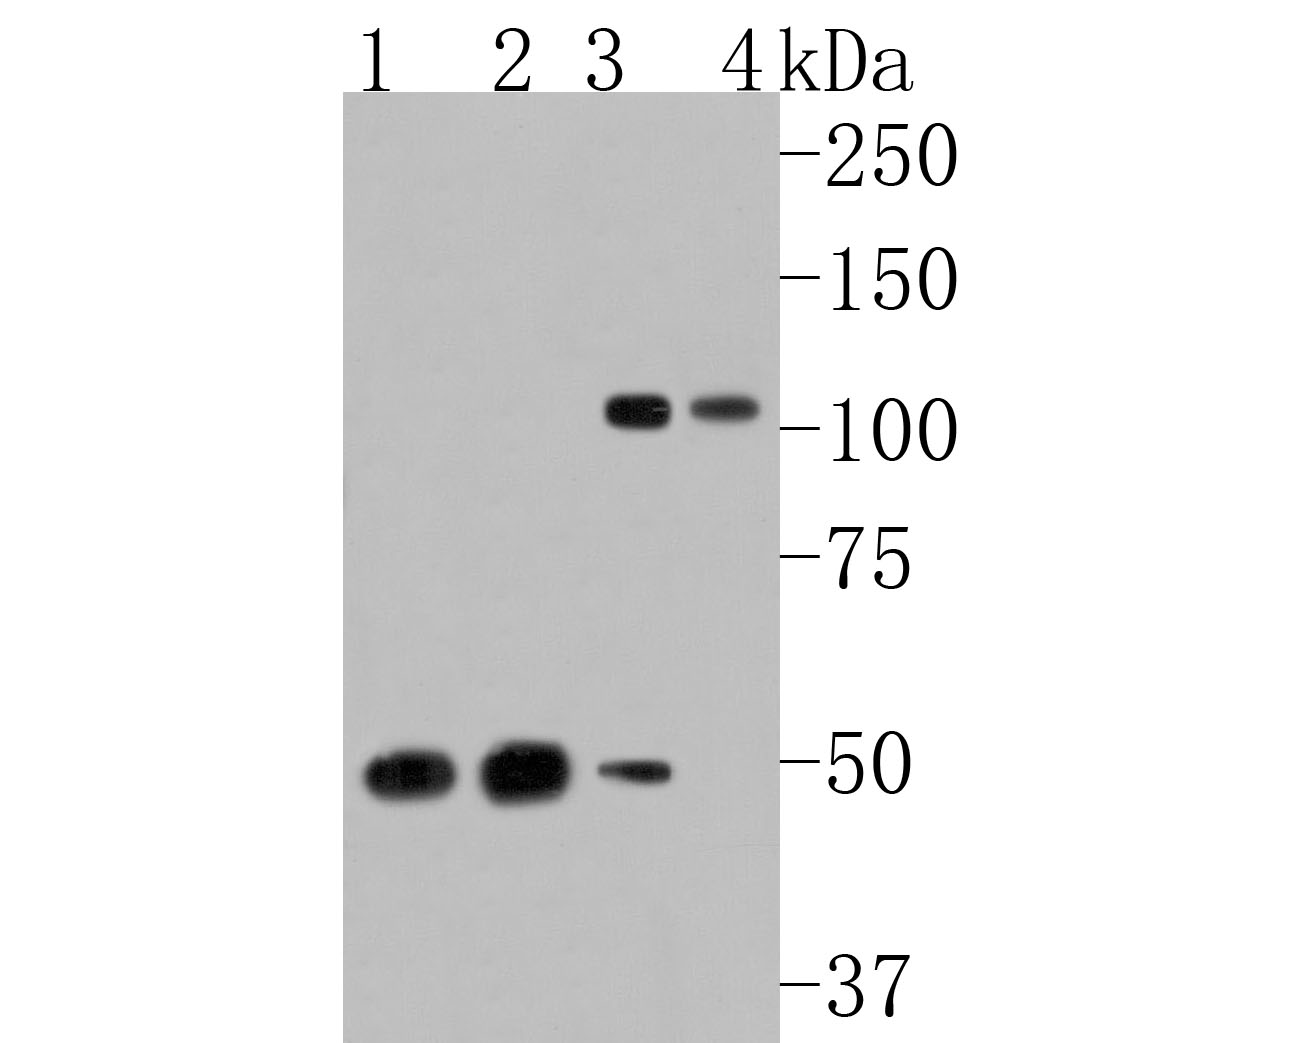 Western blot analysis of ORP1 on different lysates. Proteins were transferred to a PVDF membrane and blocked with 5% NFDM/TBST for 1 hour at room temperature. The primary antibody (HA720053, 1/500) was used in 5% NFDM/TBST at room temperature for 2 hours. Goat Anti-Rabbit IgG - HRP Secondary Antibody (HA1001) at 1:200,000 dilution was used for 1 hour at room temperature.<br />
Positive control: <br />
Lane 1: Mouse heart tissue lysate<br />
Lane 2: Rat brain tissue lysate<br />
Lane 3: A549 cell lysate<br />
Lane 4: PC-3 cell lysate